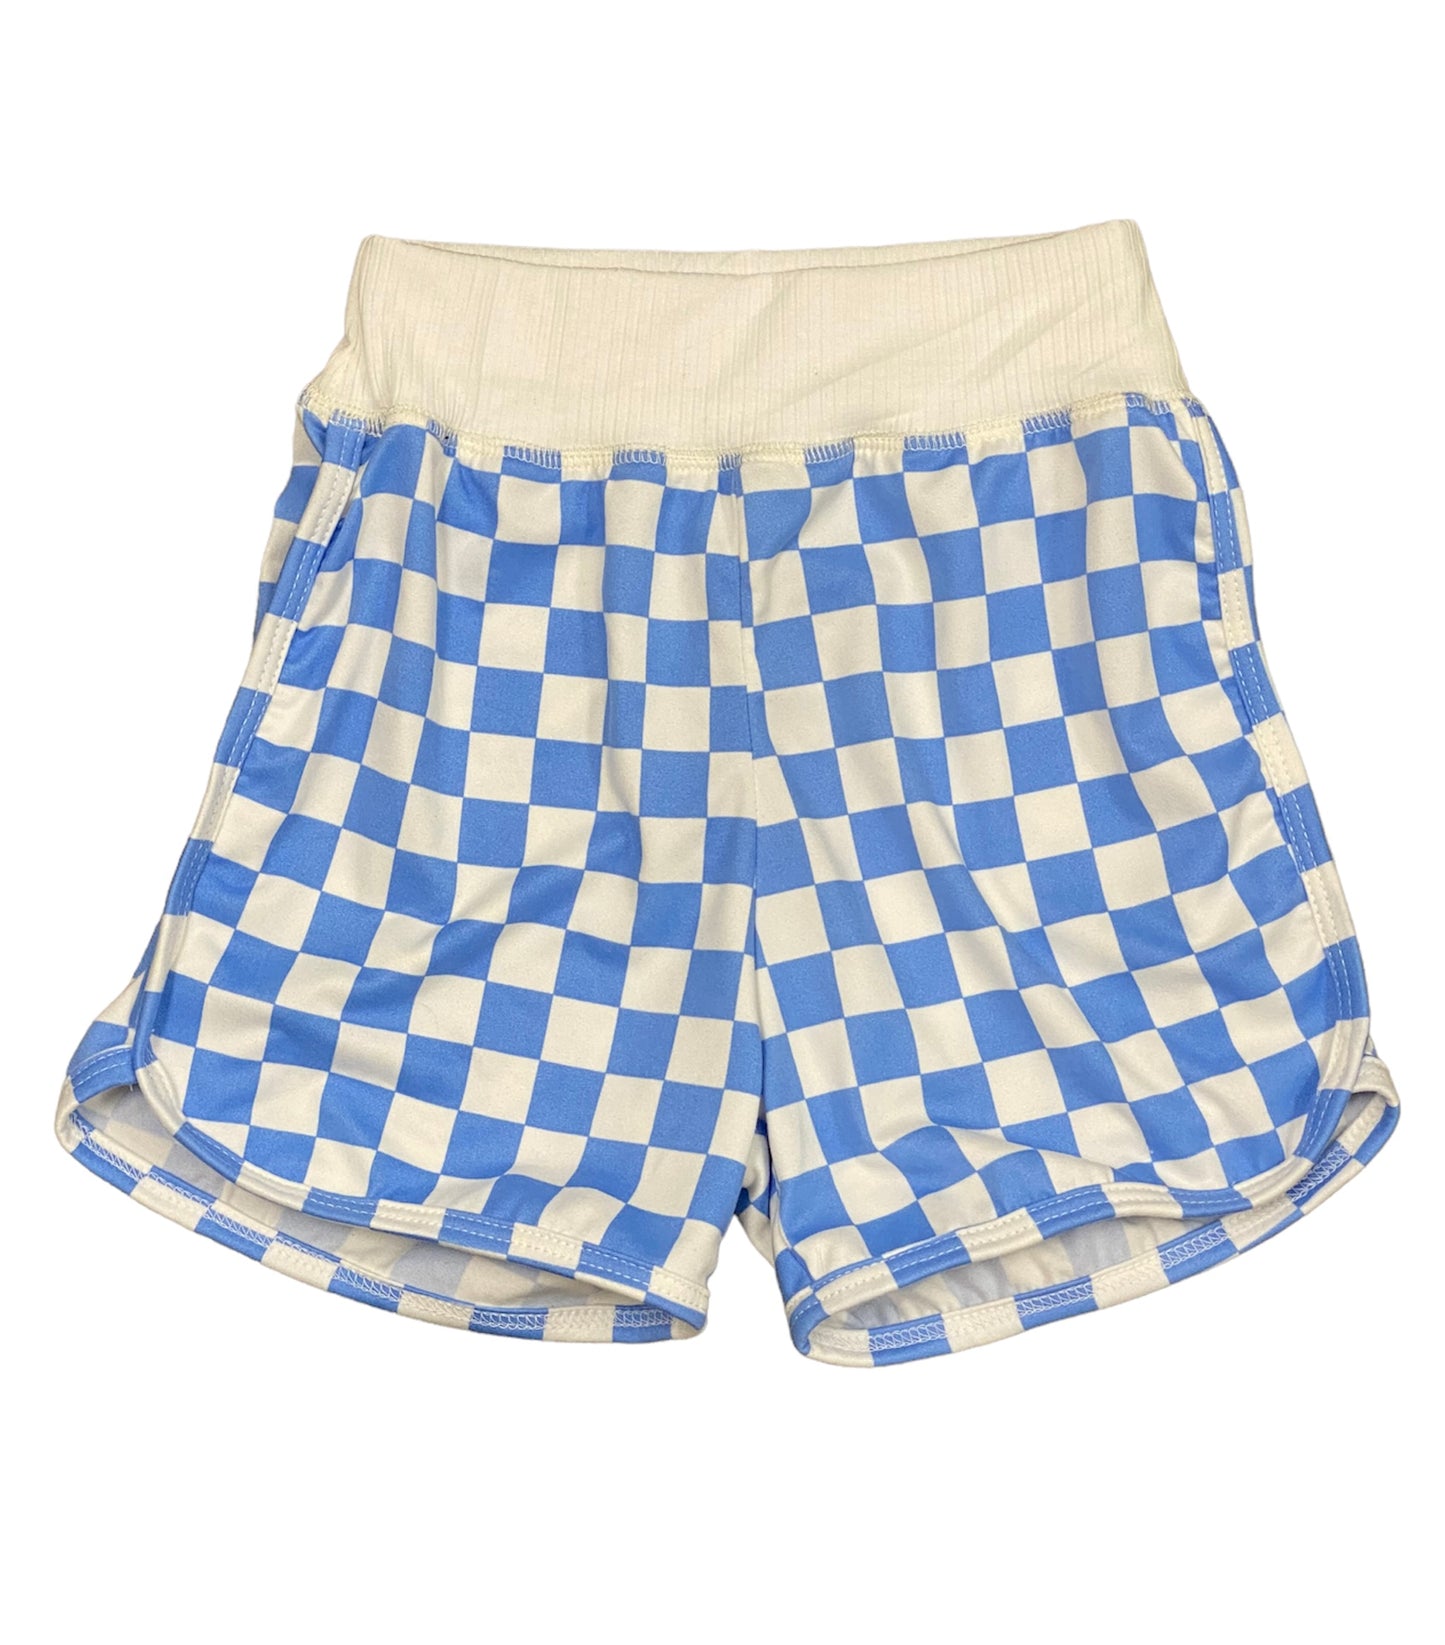 Blue and White Checkered Shorts